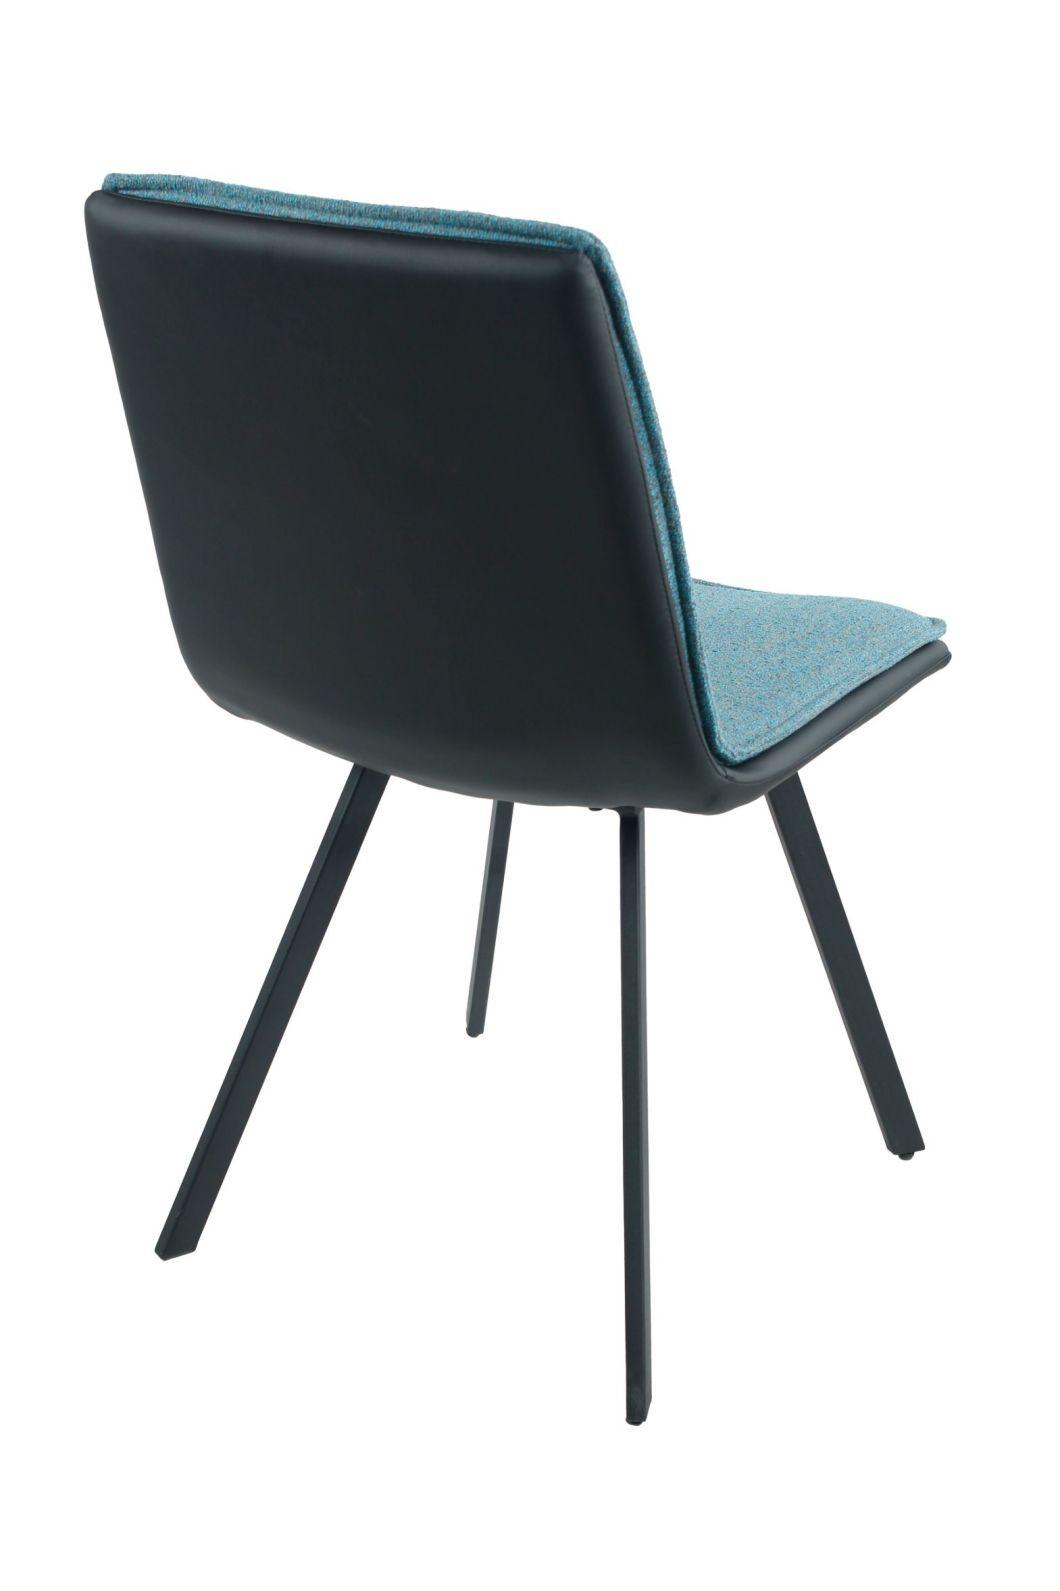 Popular Dining Furniture Modern Fabric PU/Leather Chairs Dining Chairs with Metal Legs